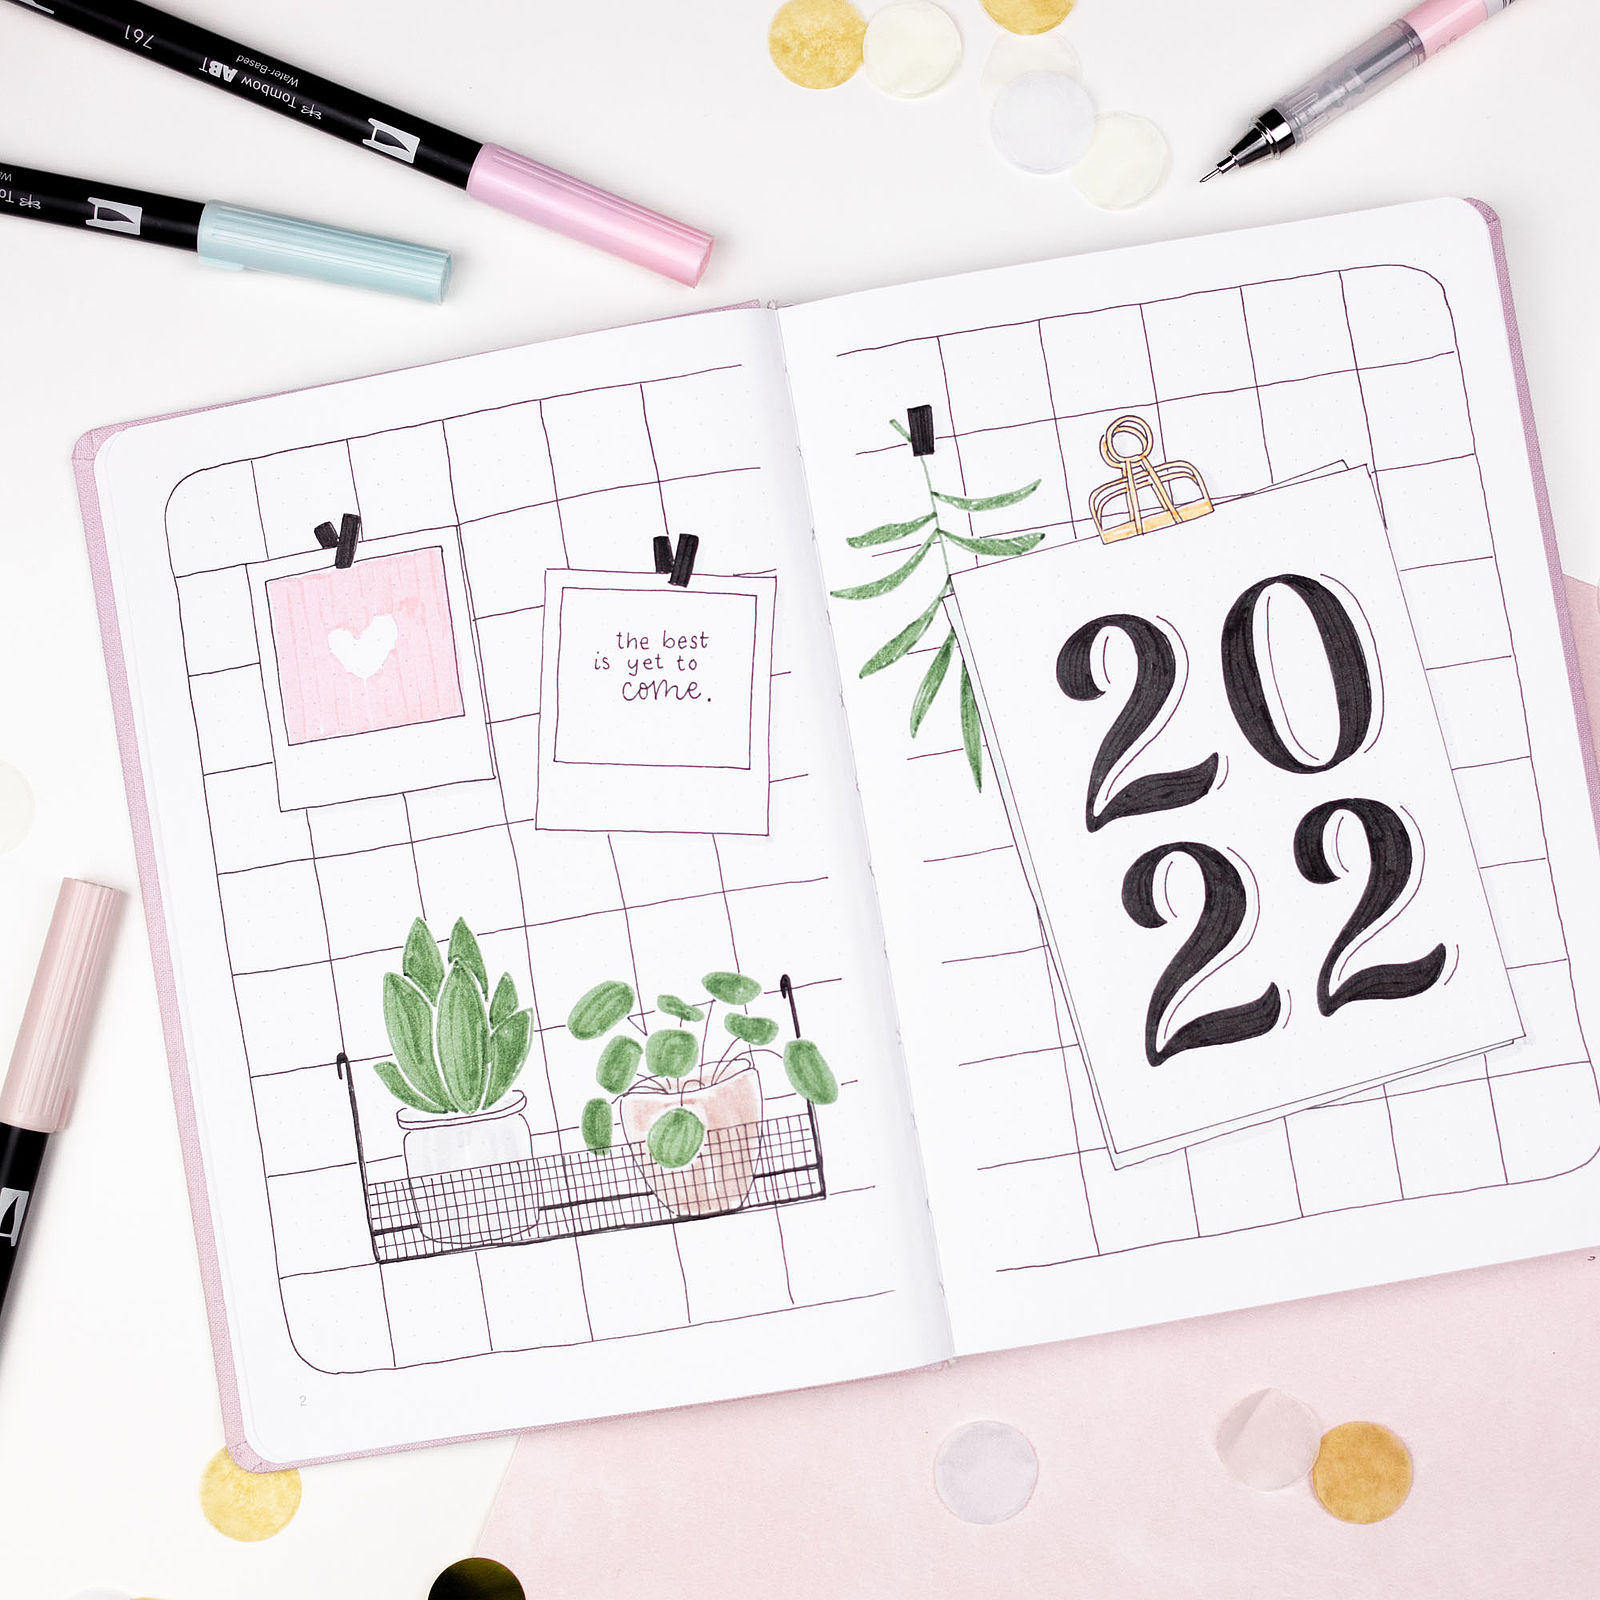 Free Bullet Journal Templates Tombow